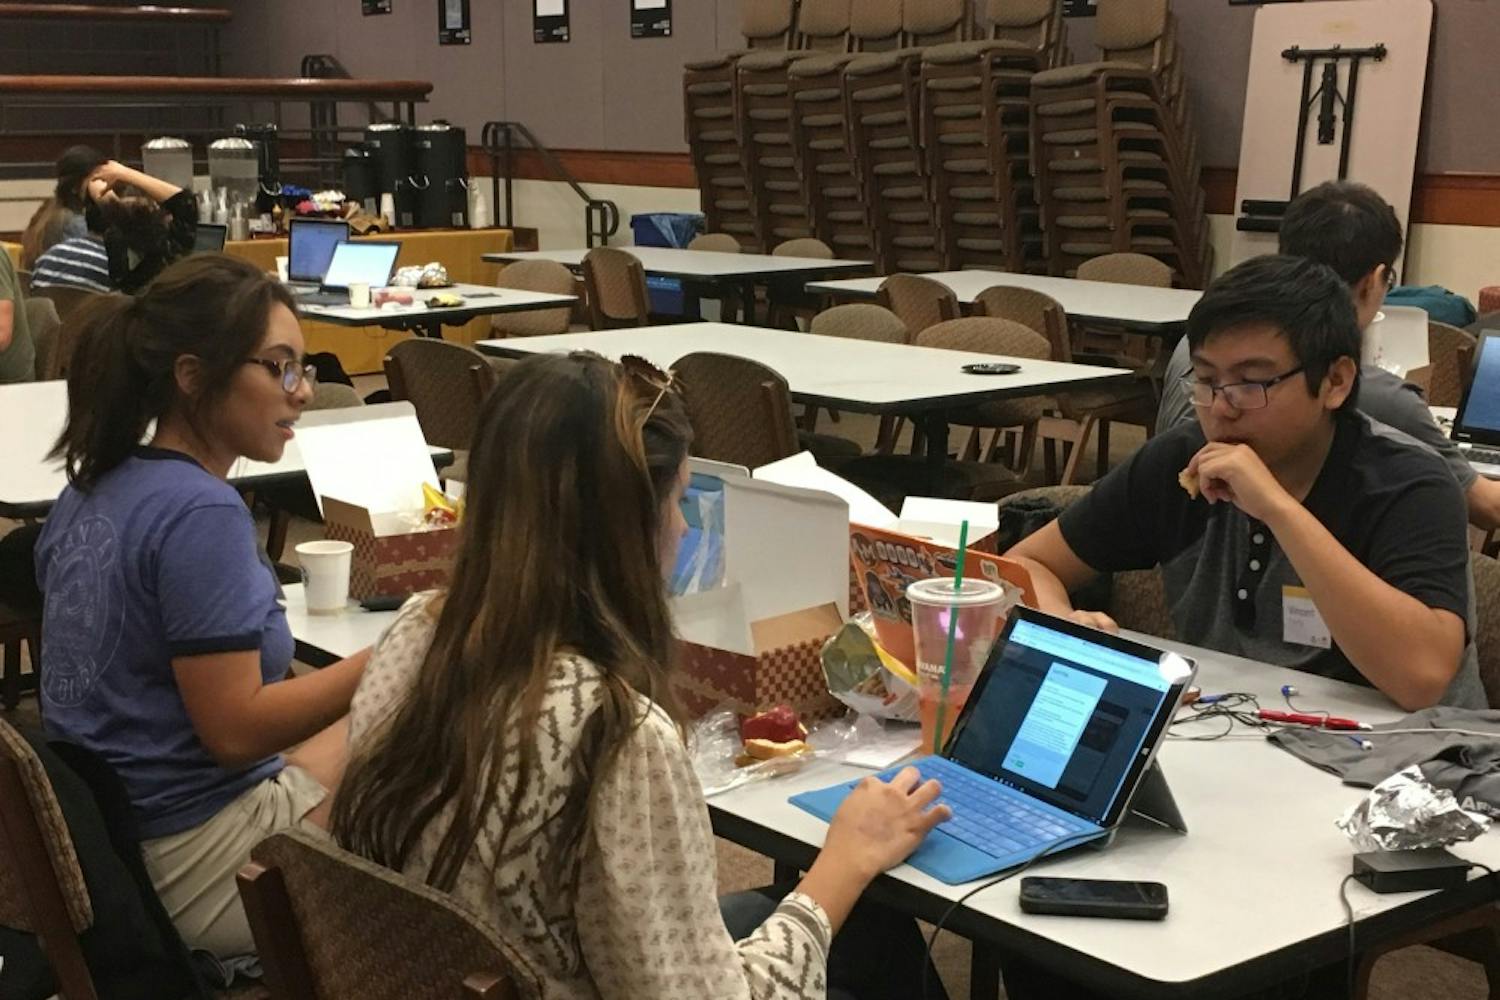 A team develops its&nbsp;app during the Great&nbsp;Appathon&nbsp;on Oct. 15 in the Memorial Union.&nbsp;